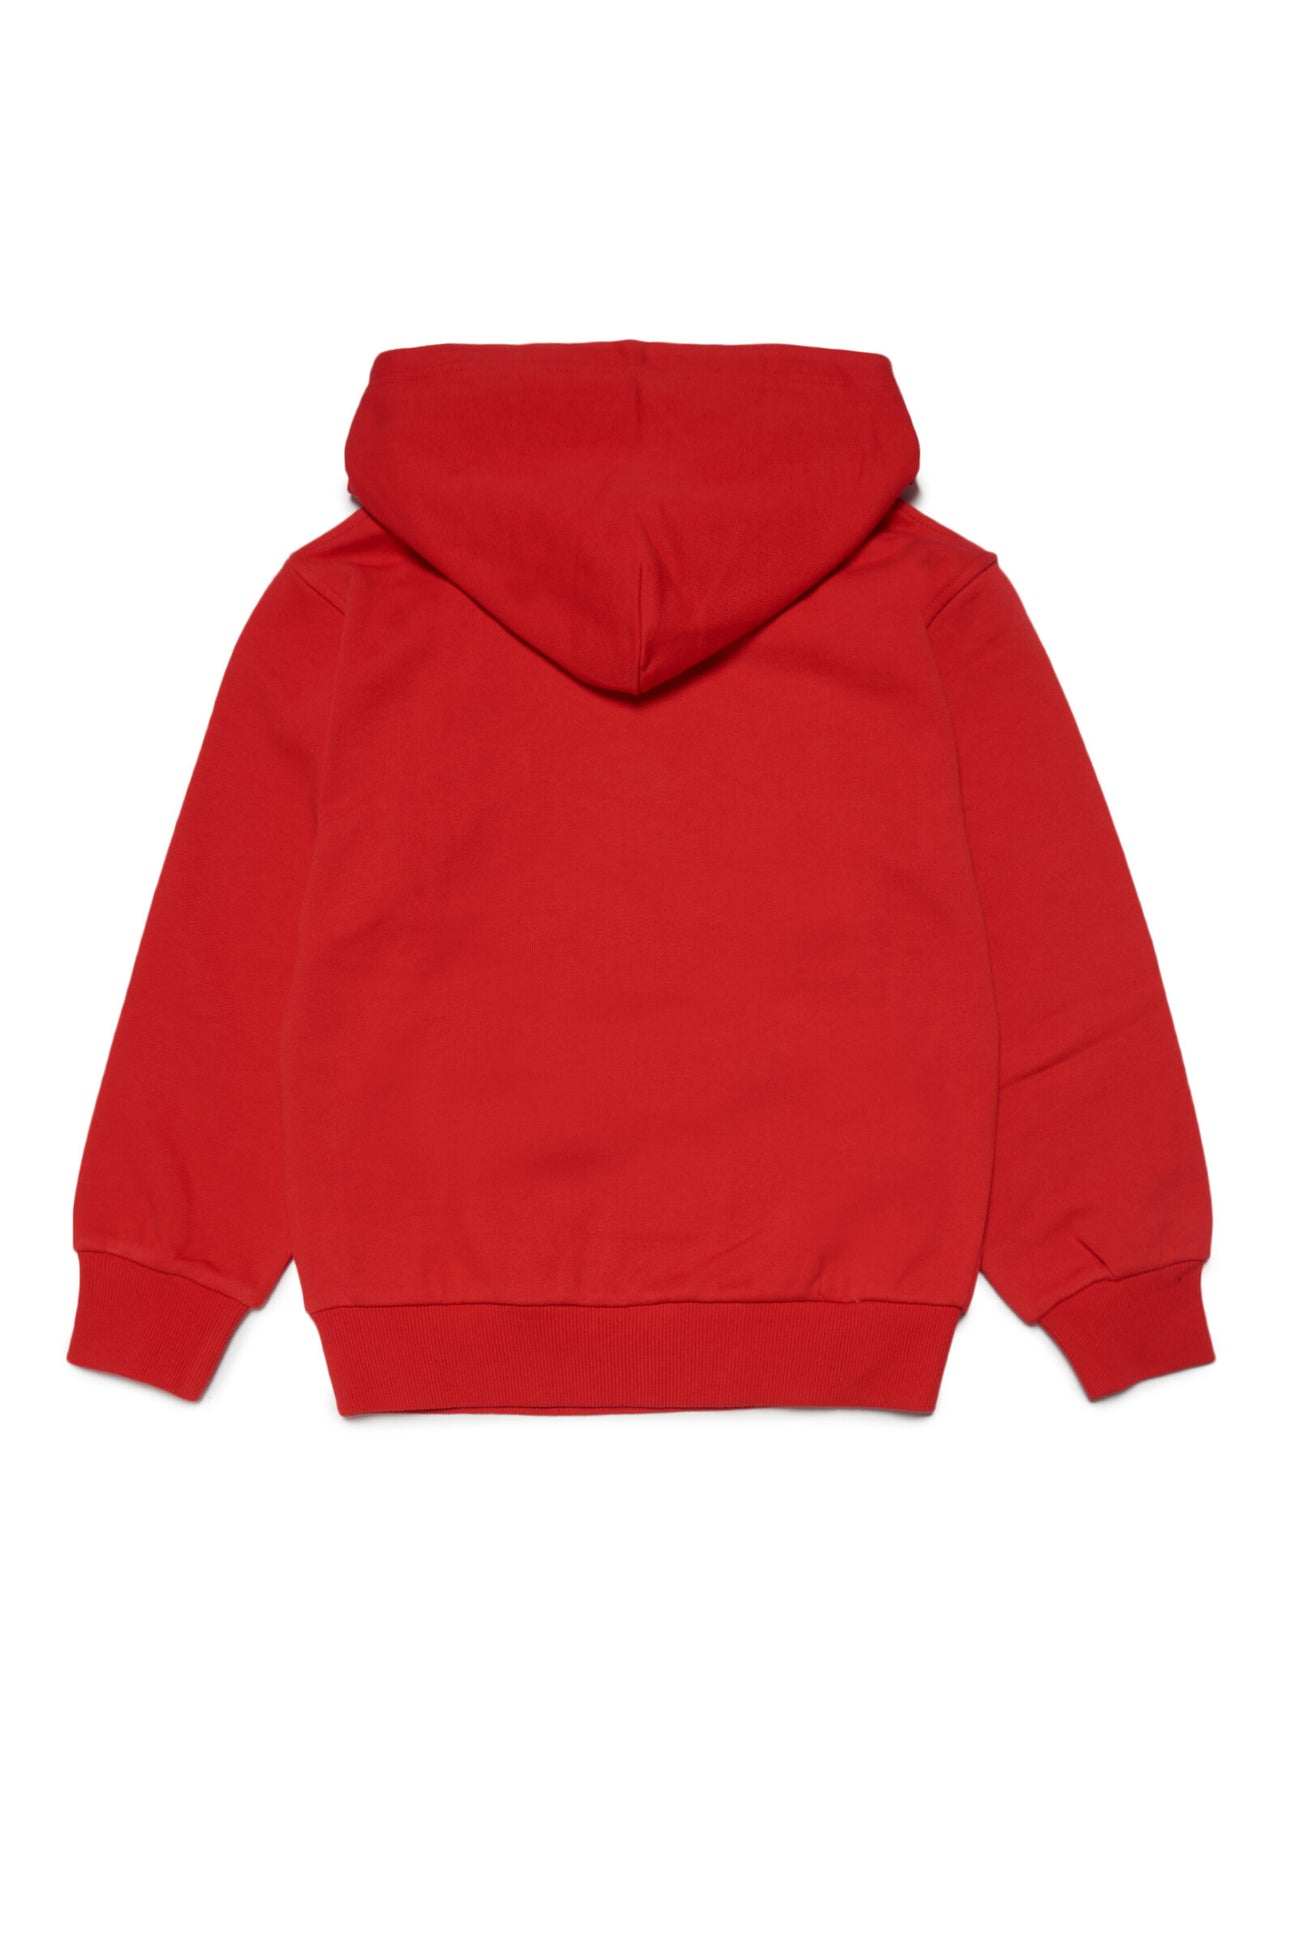 Red hooded sweatshirt with watercolor effect logo Red hooded sweatshirt with watercolor effect logo